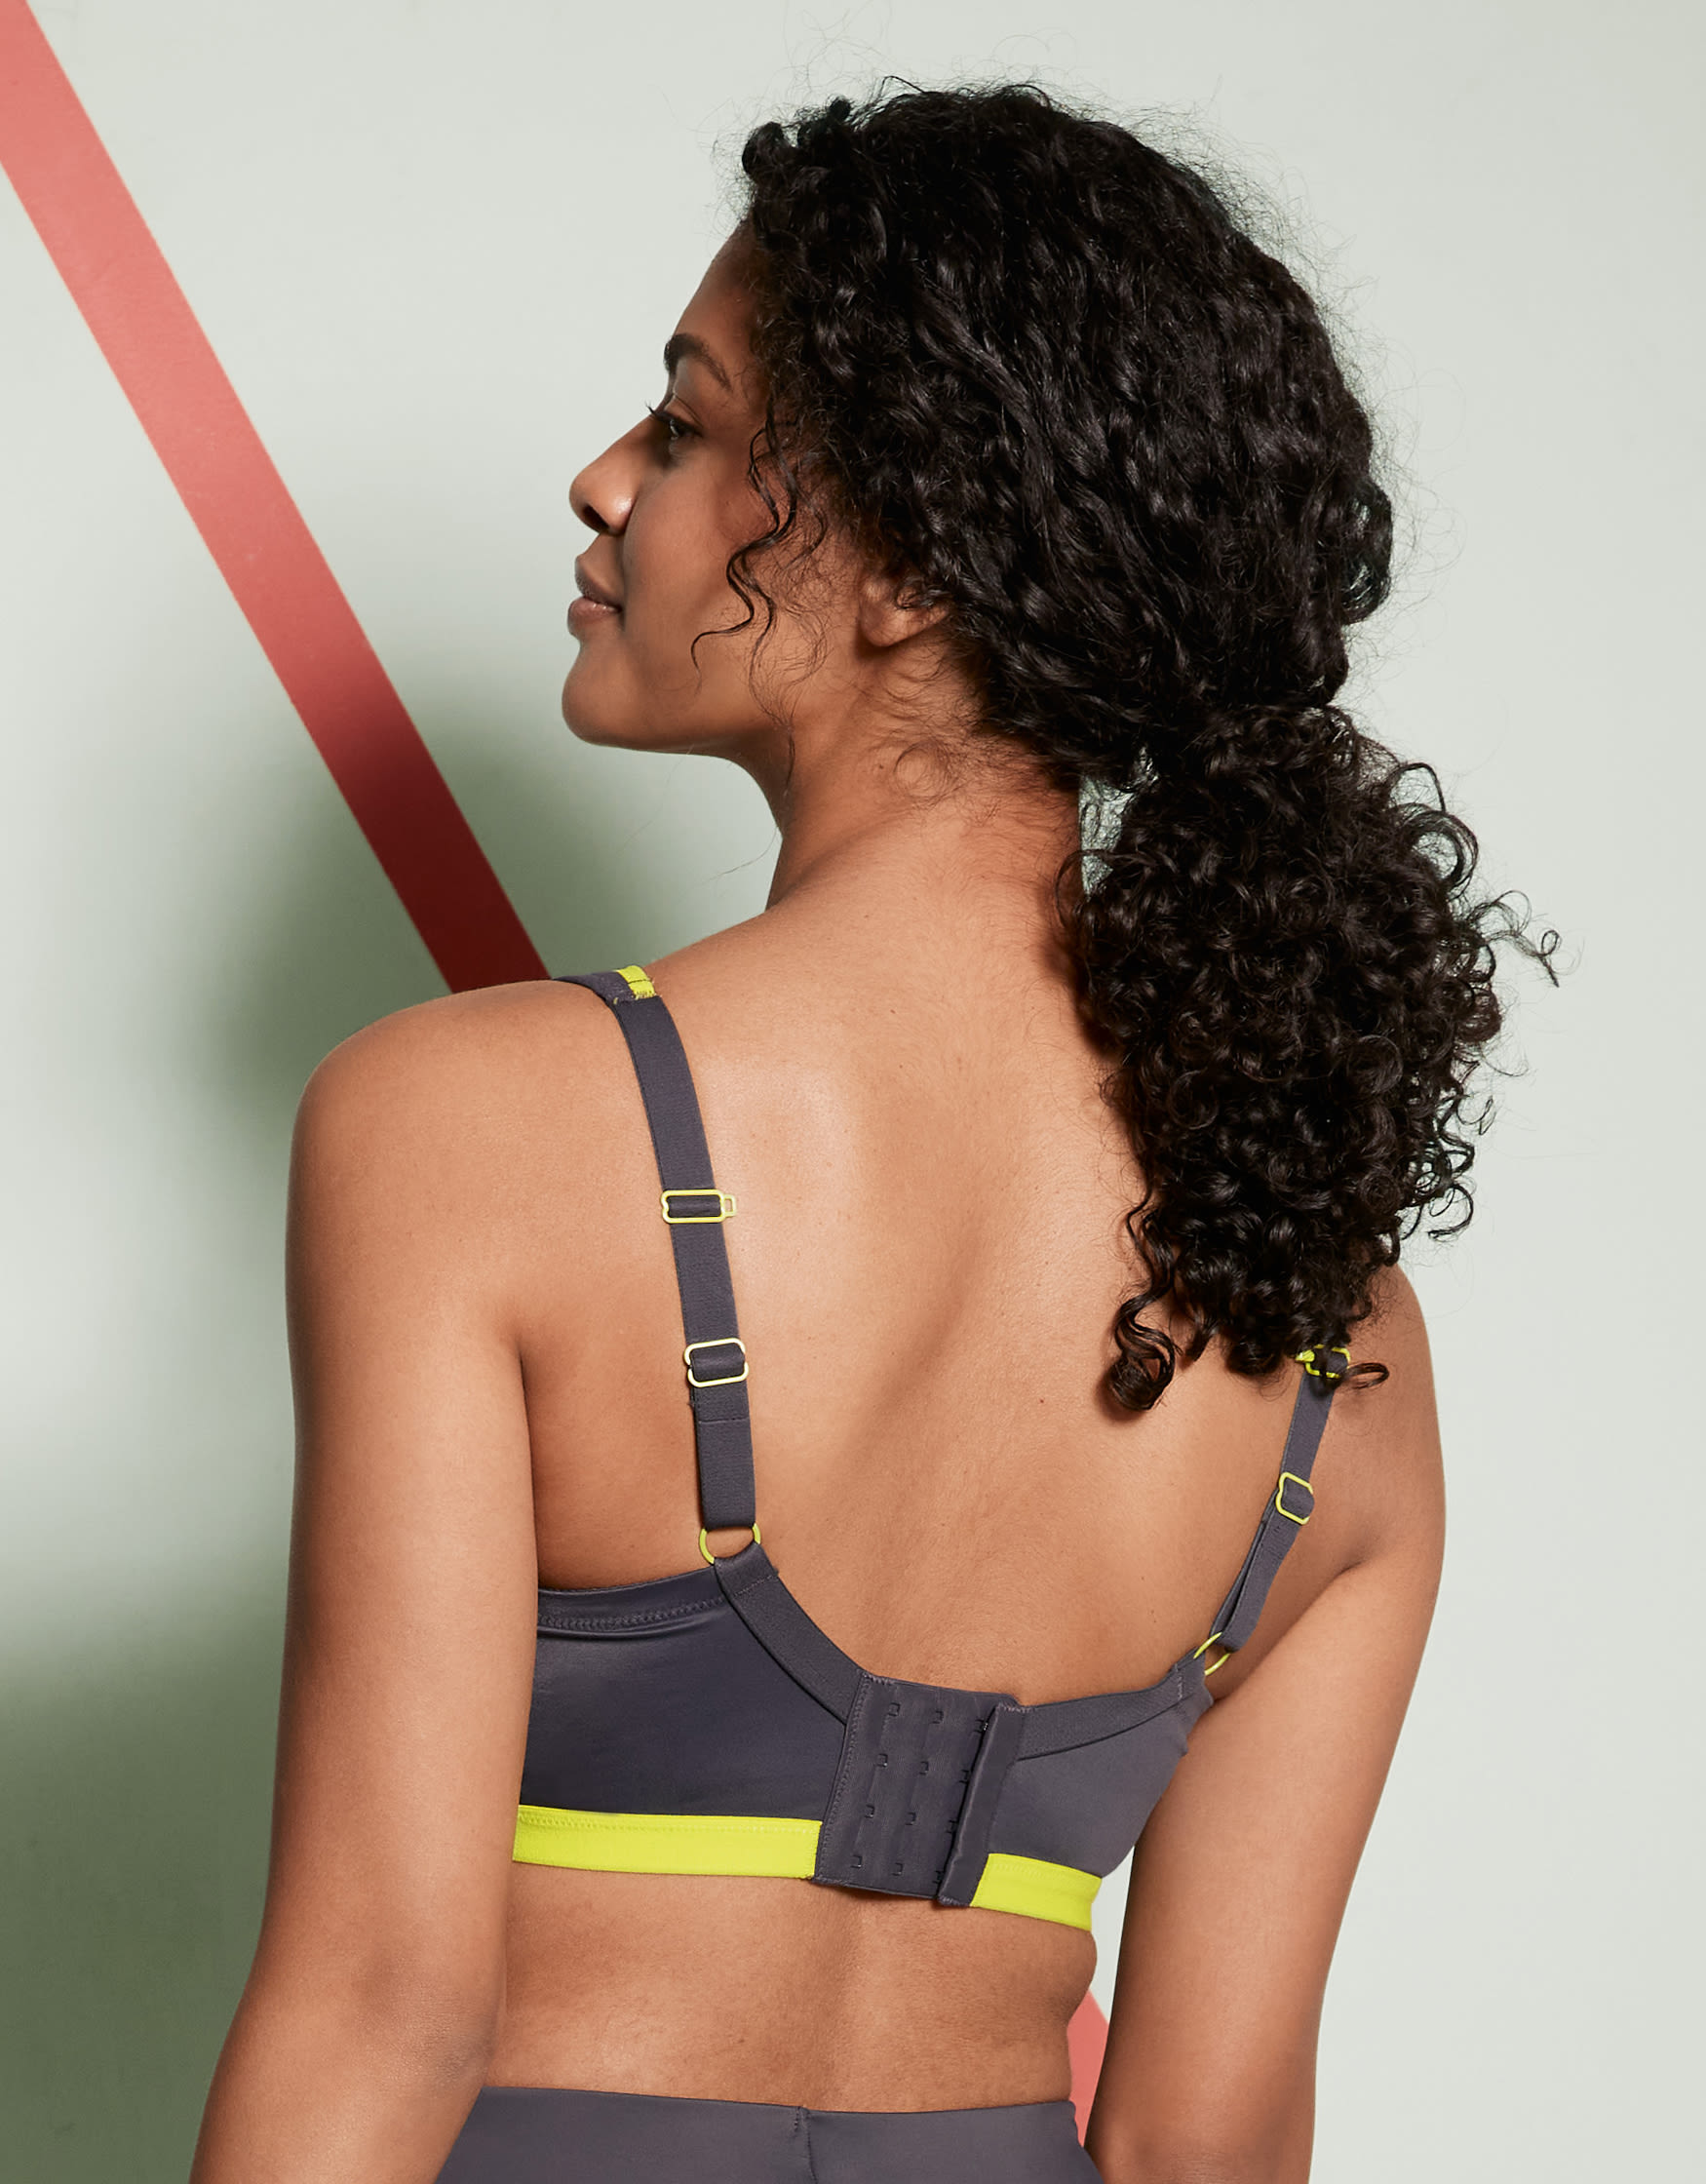 Blue Freya Active Dynamic AC4014 Non-wired Soft Cup Sports Bra